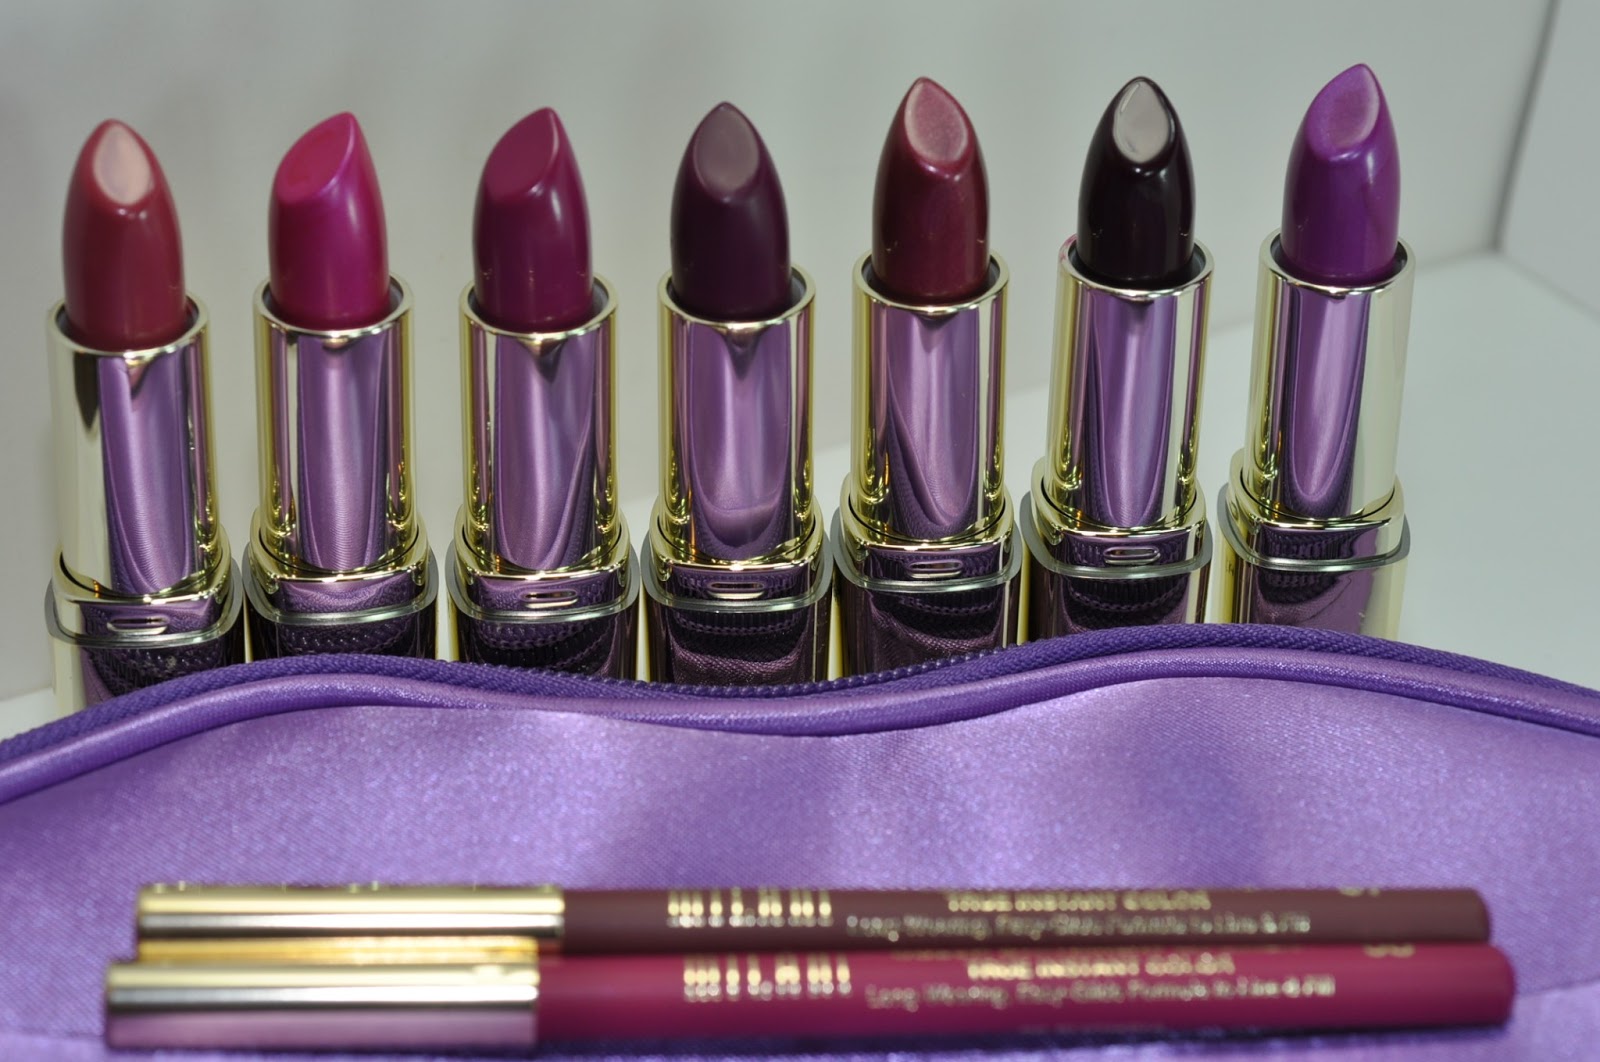 Milani Color Statement Lipsticks: Plums and Berries Swatches and Review -  The Shades Of U